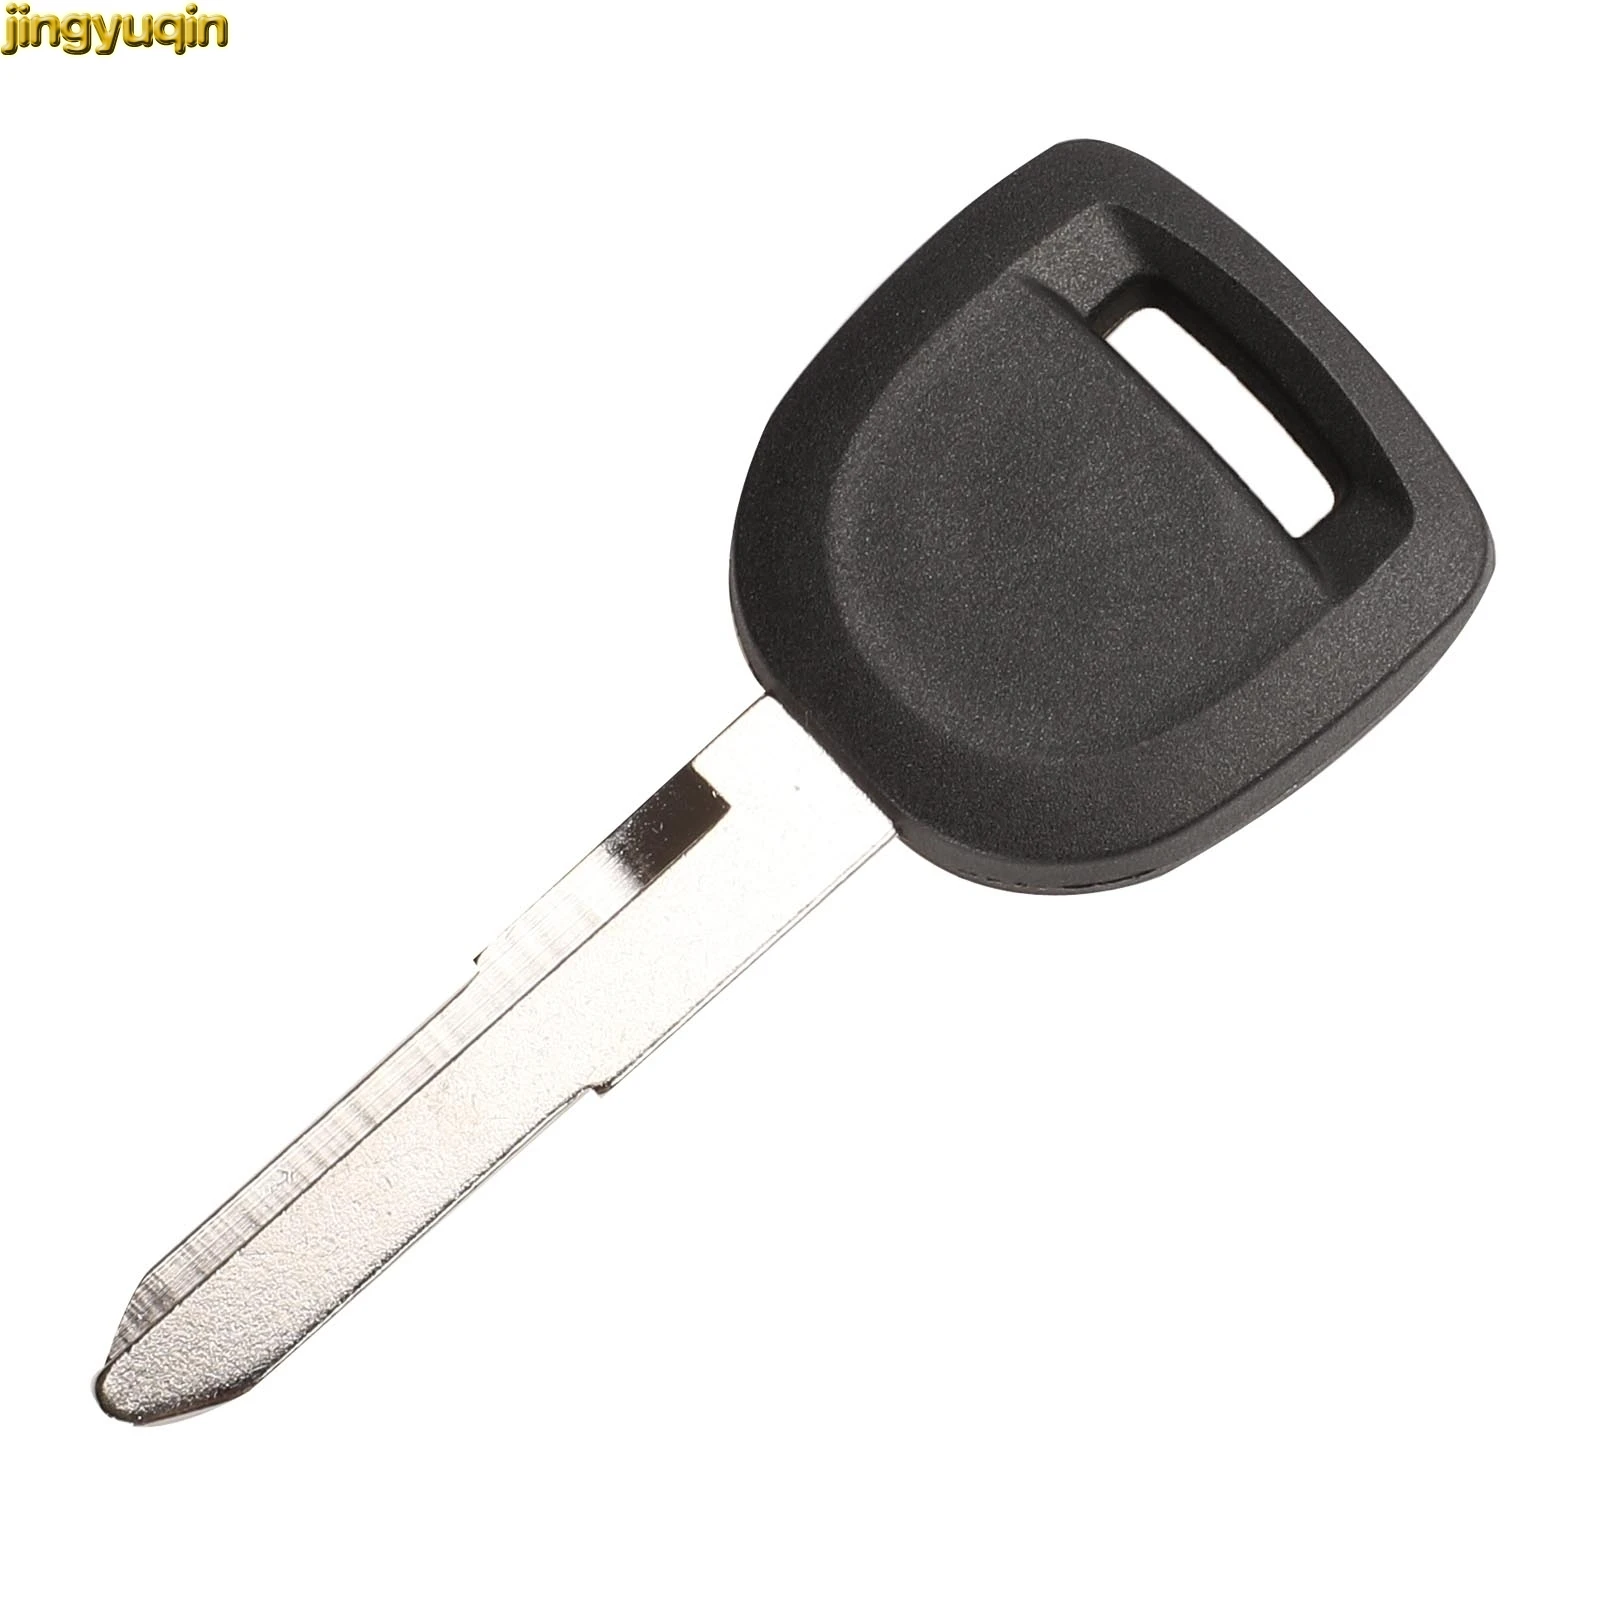 

Jingyuqin Transponder Key Shell for Mazda 2 3 5 6 MX5 RX8 Uncut Right Blade Key Blank Cover Case Replacement Fob No Chip